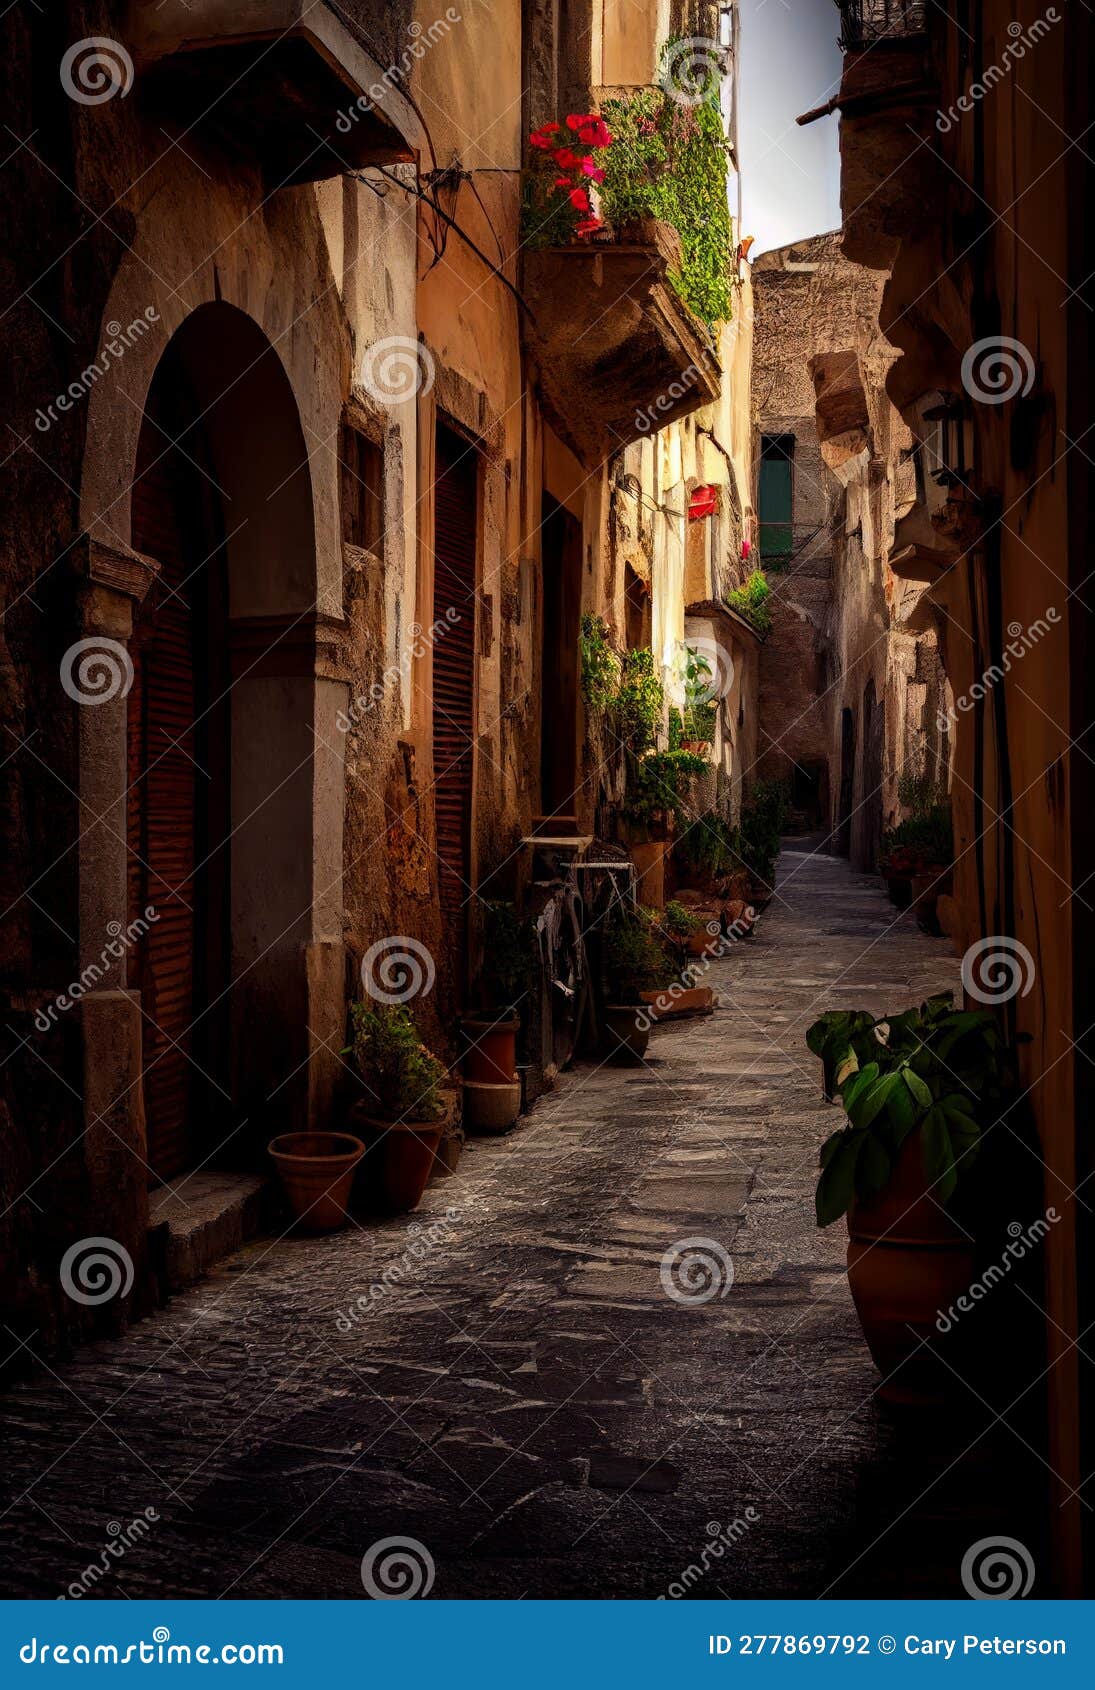 the narrow, potted-plant-lined street of bernie andrea